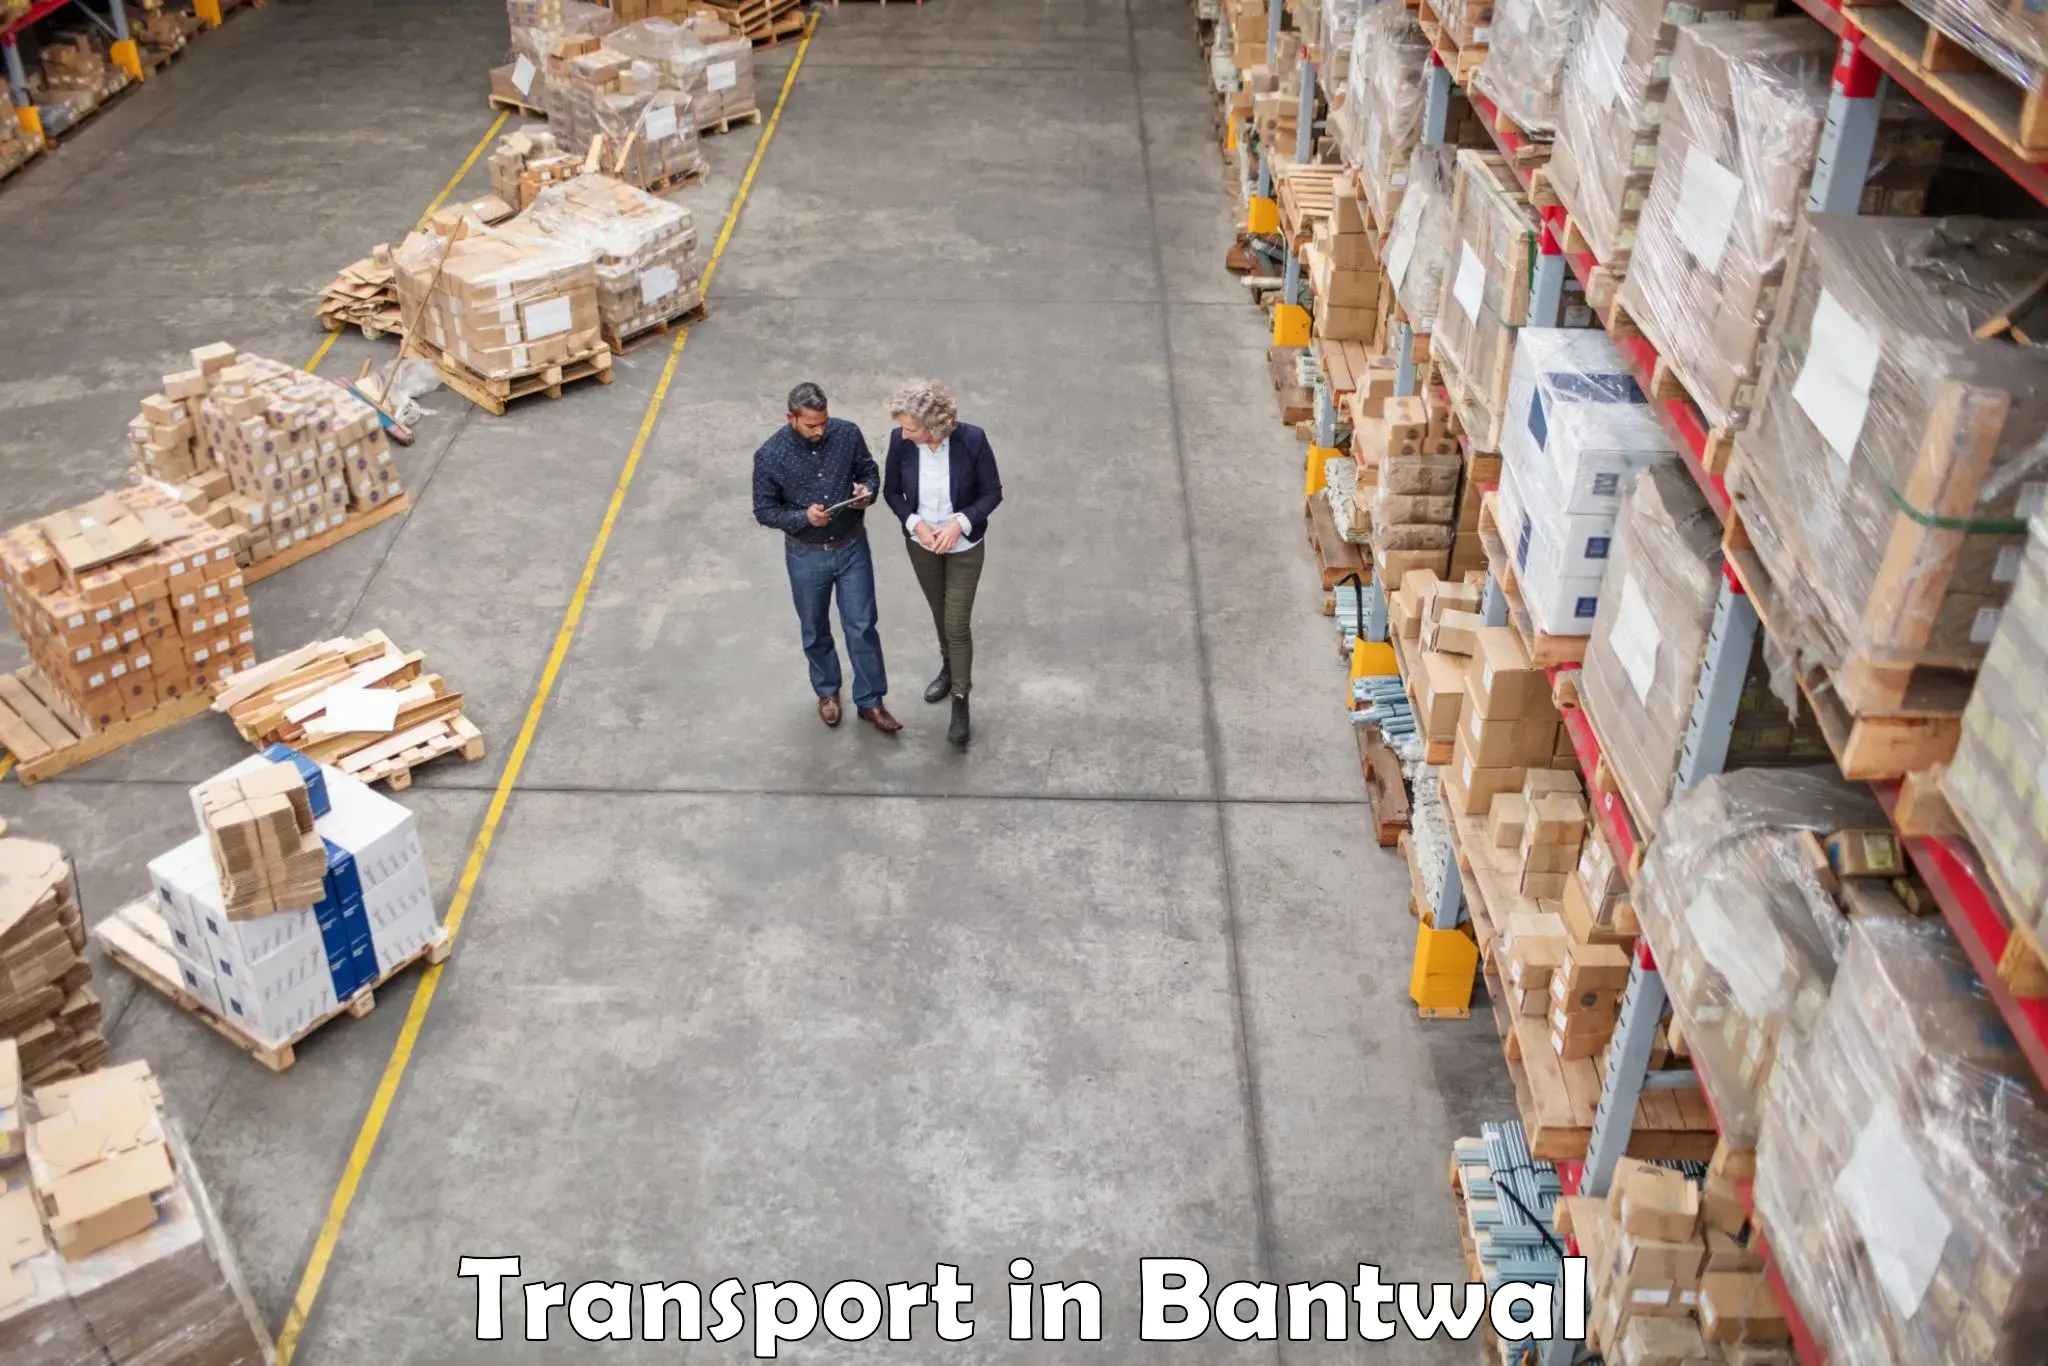 Cargo transportation services in Bantwal